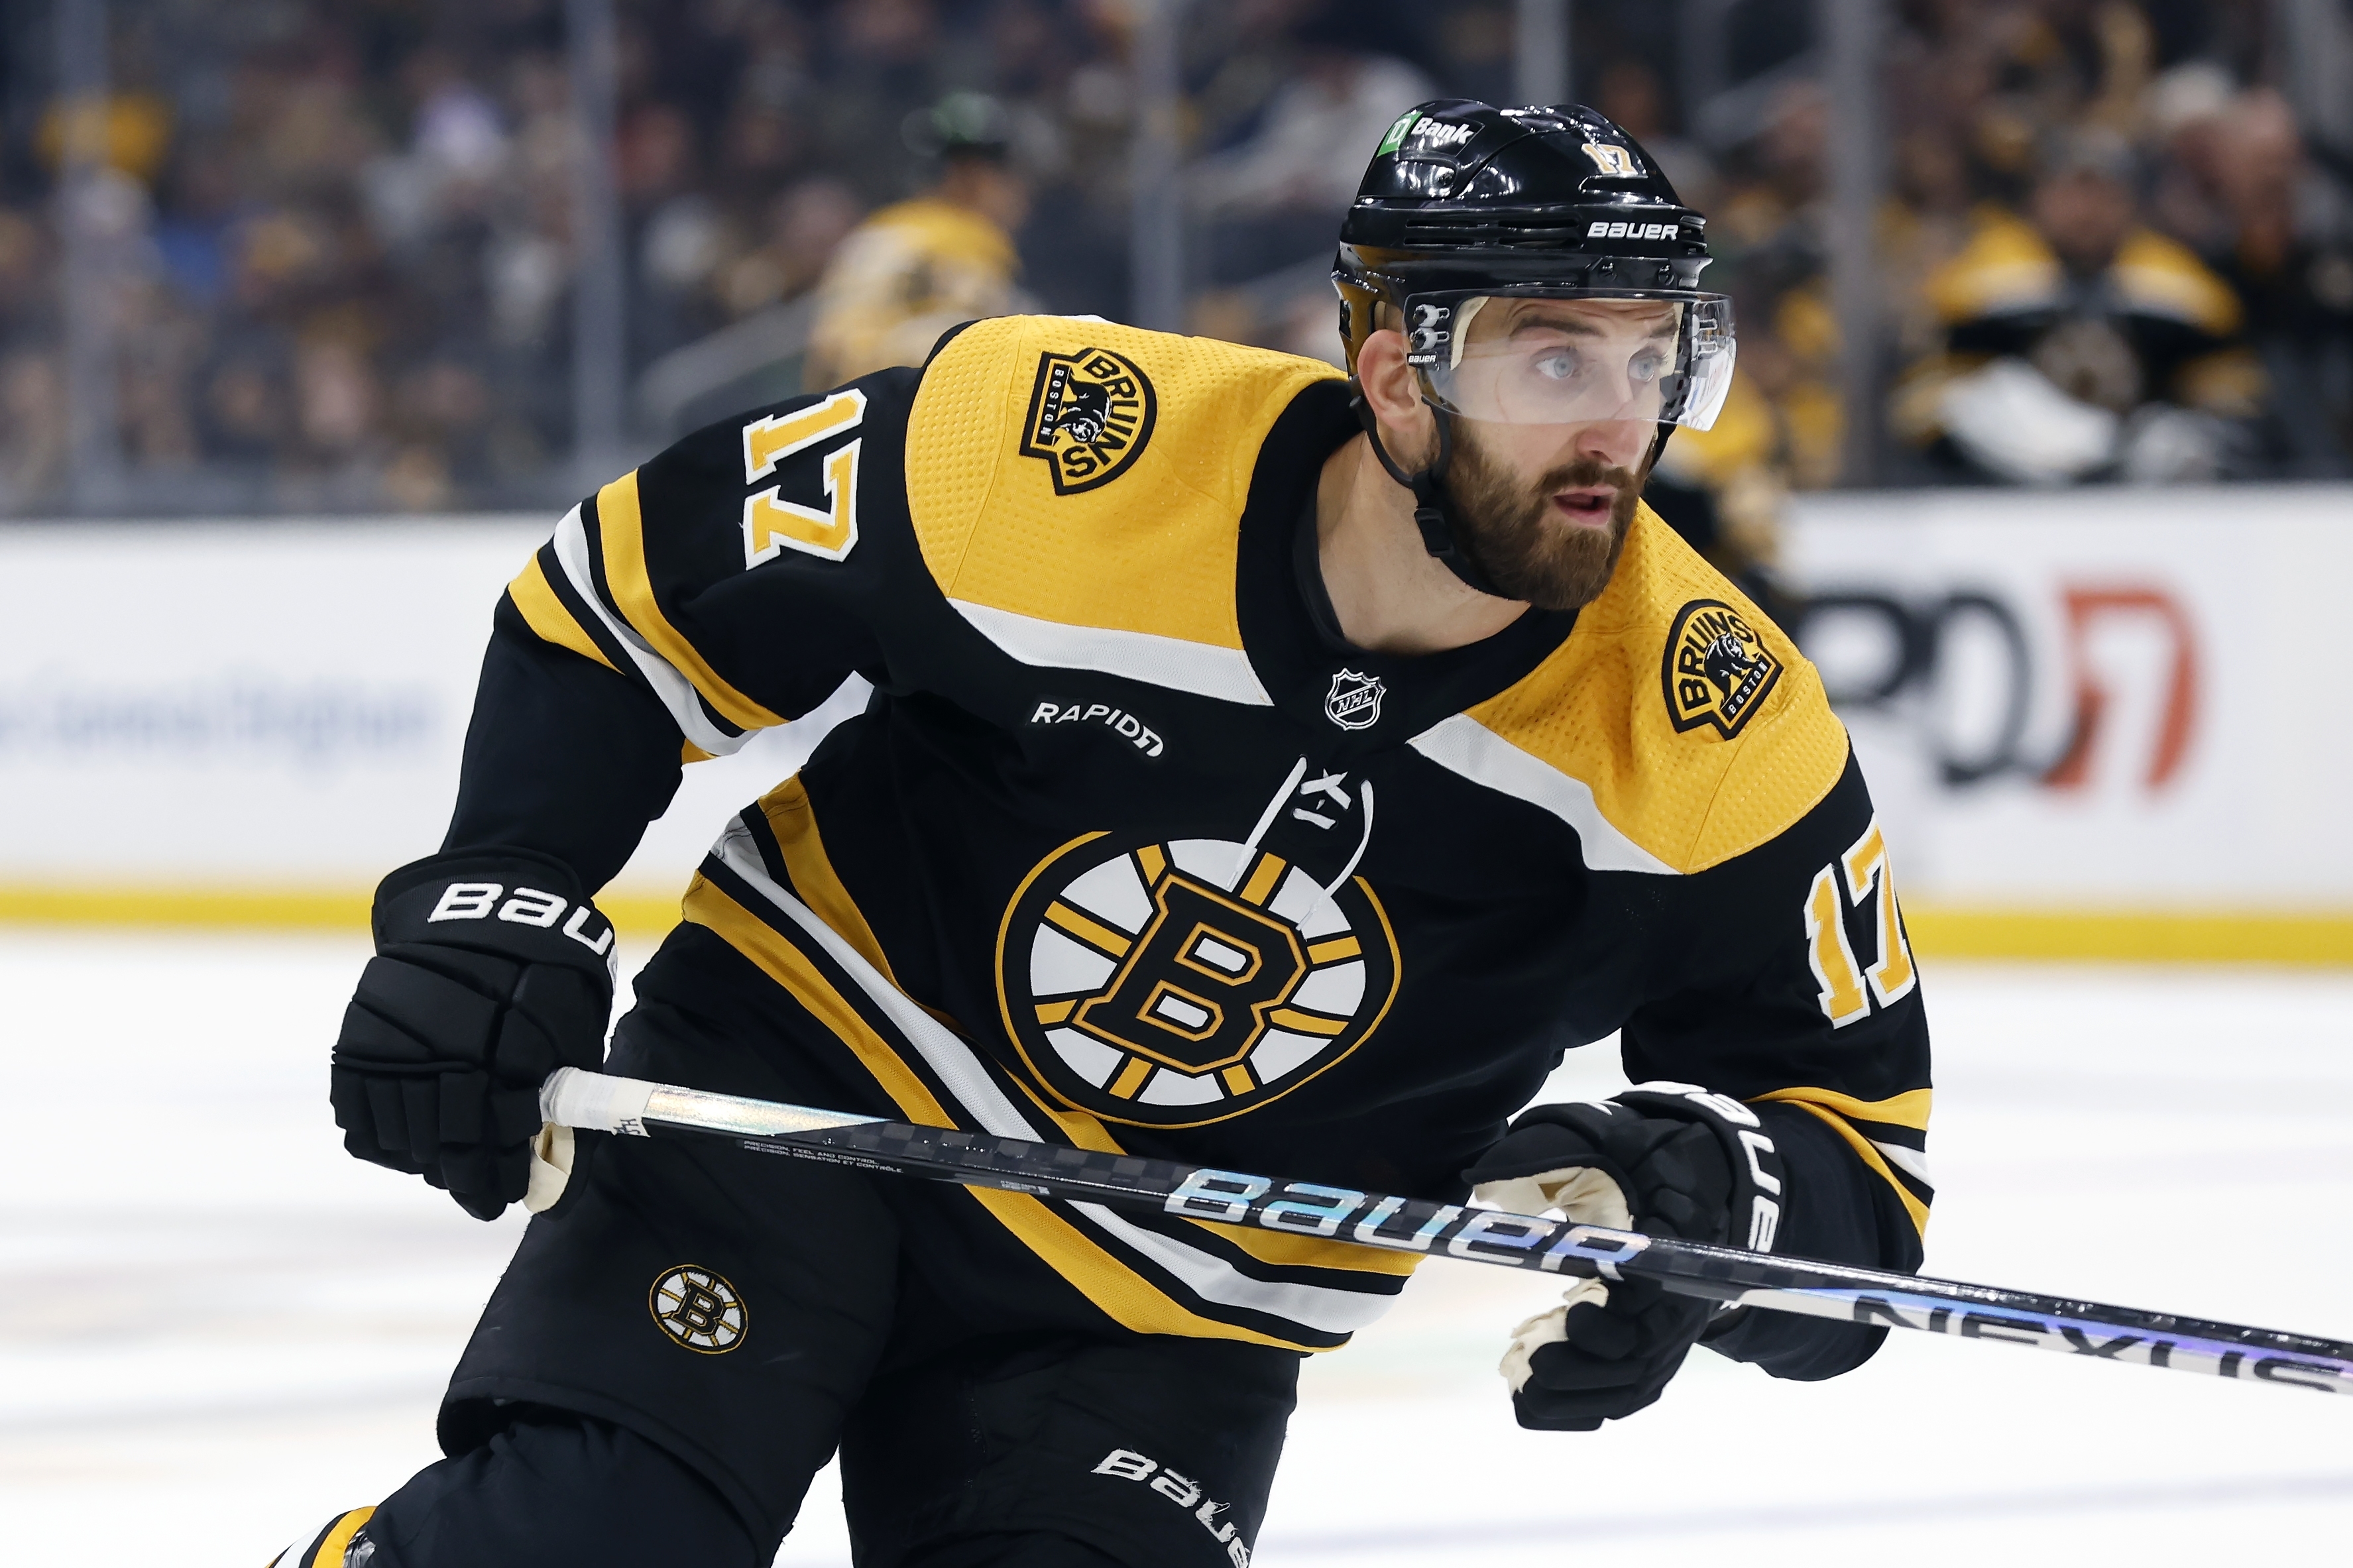 It went from bad to worse in a hurry for Bruins - The Boston Globe